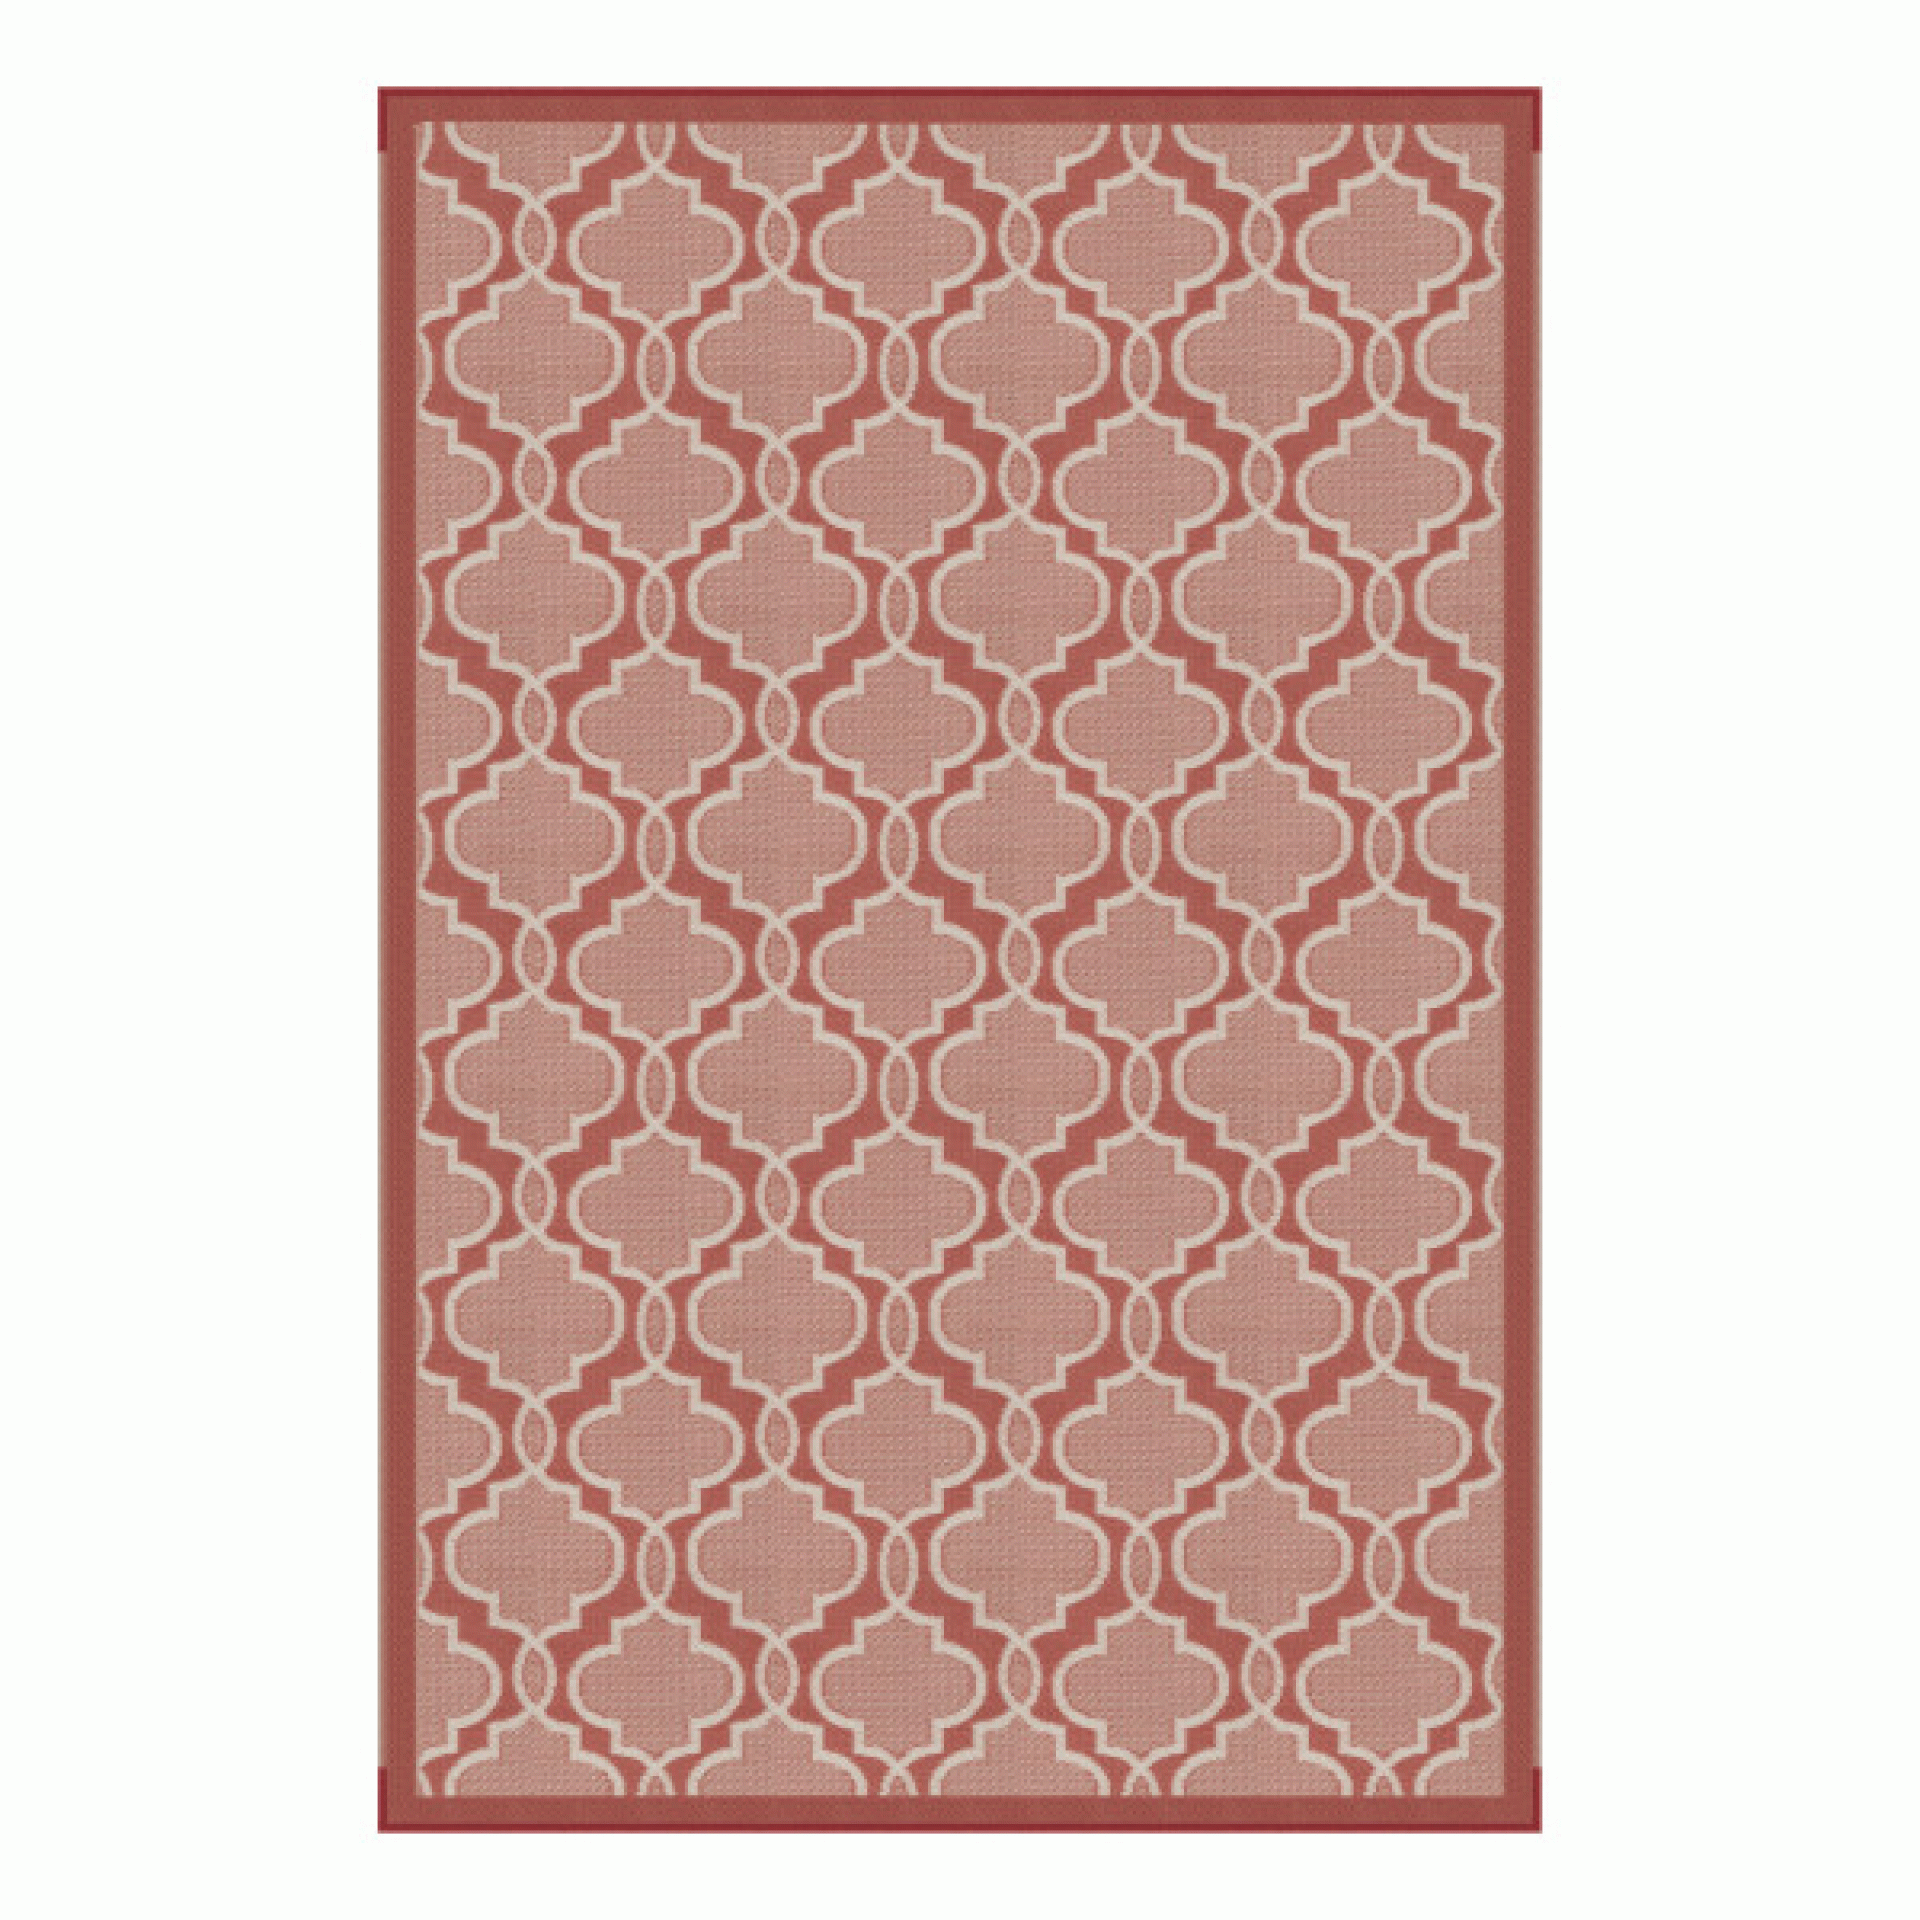 Lippert Components | 2021028029 | All Weather Patio MatAll Weather Patio Mat - 8' x 12' (Terracotta)